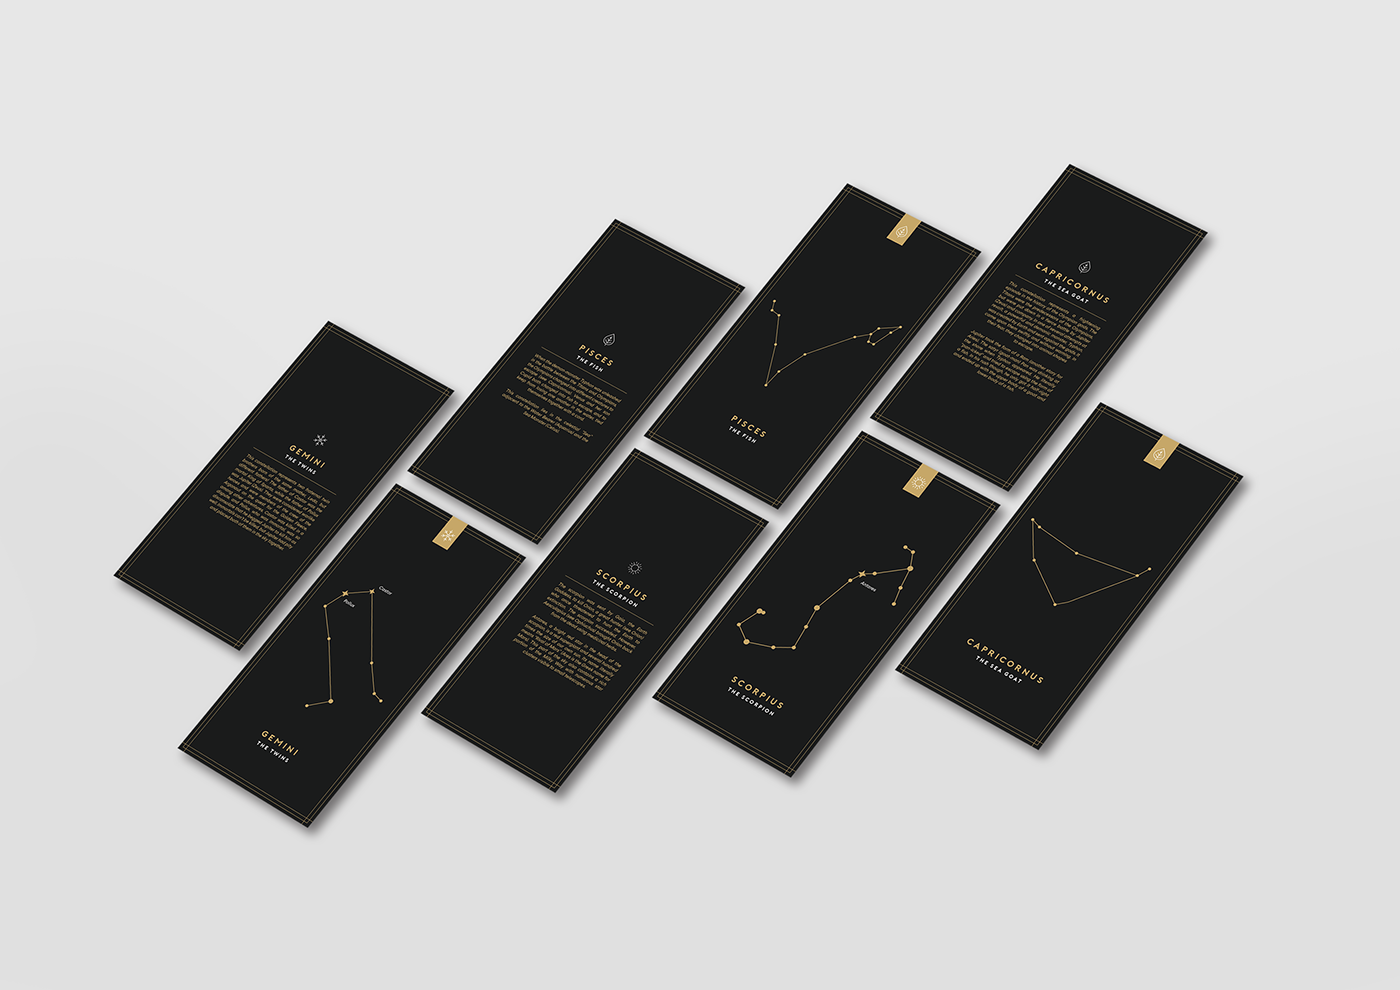 Constellations stars deck cards Packaging celestial product design  packaging design